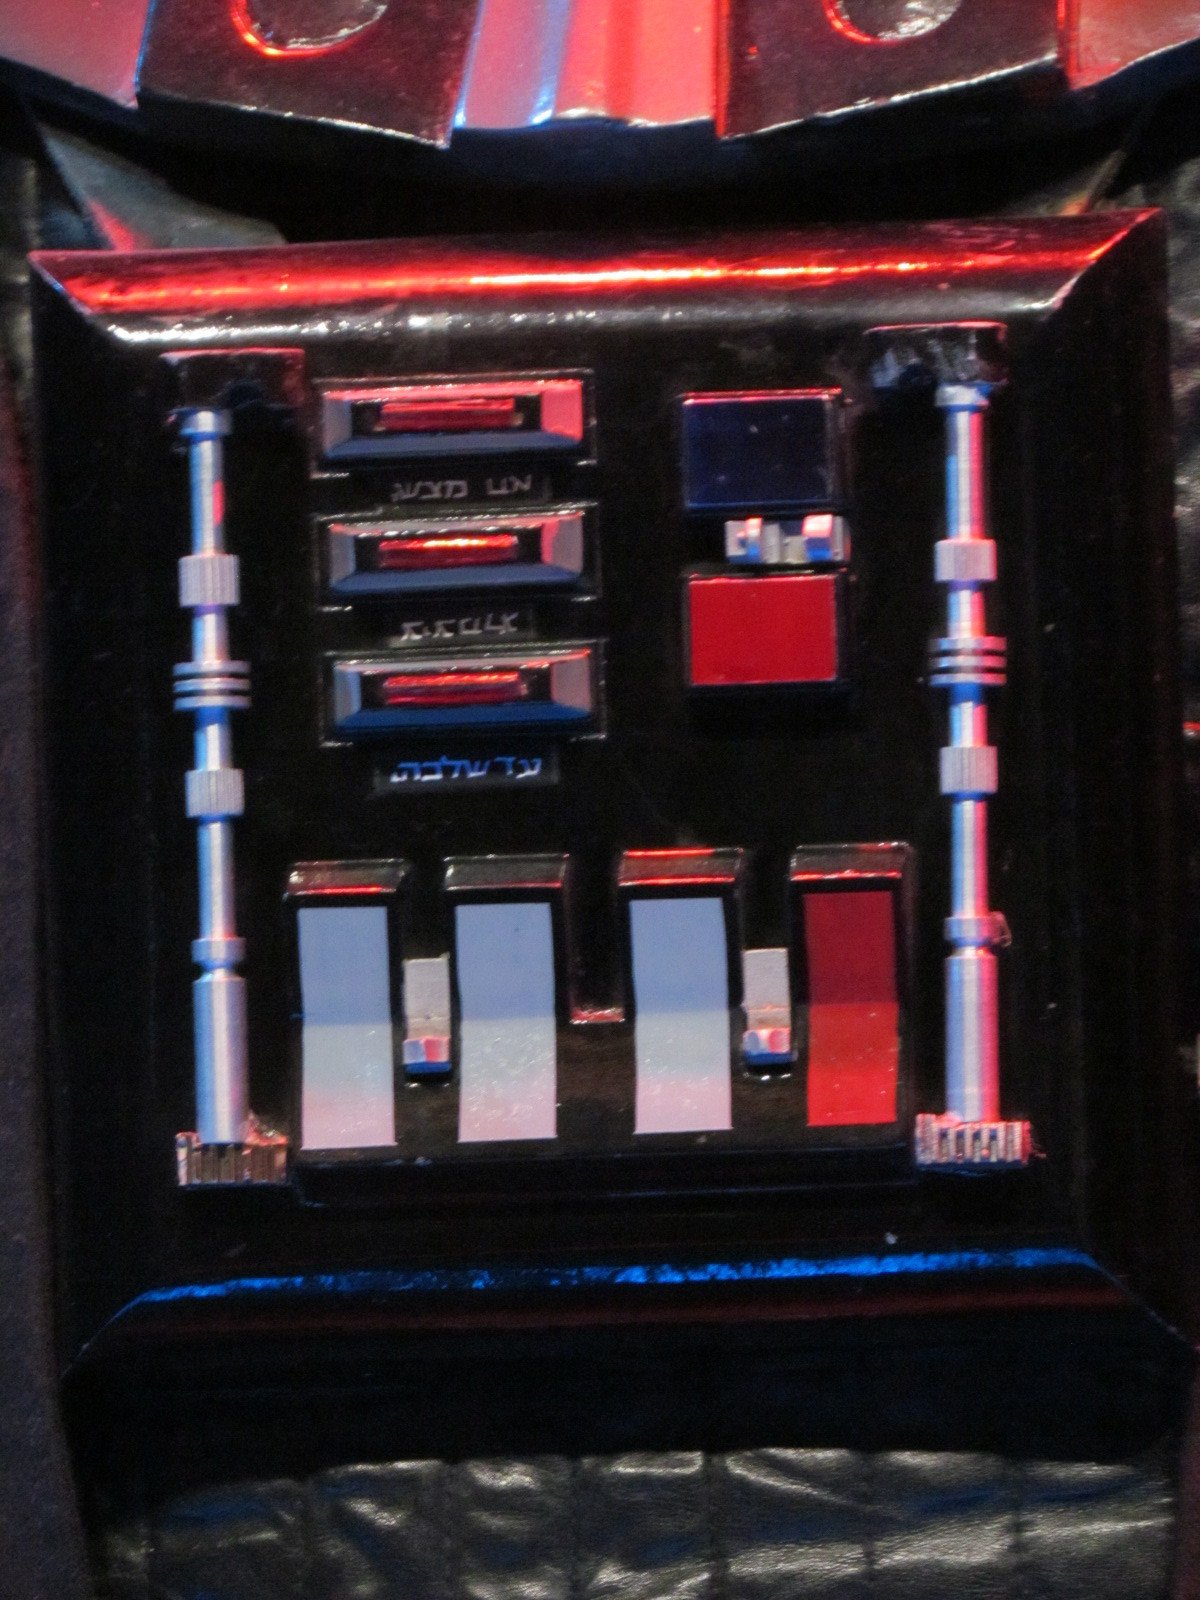 Darth Vader's Chest control panel